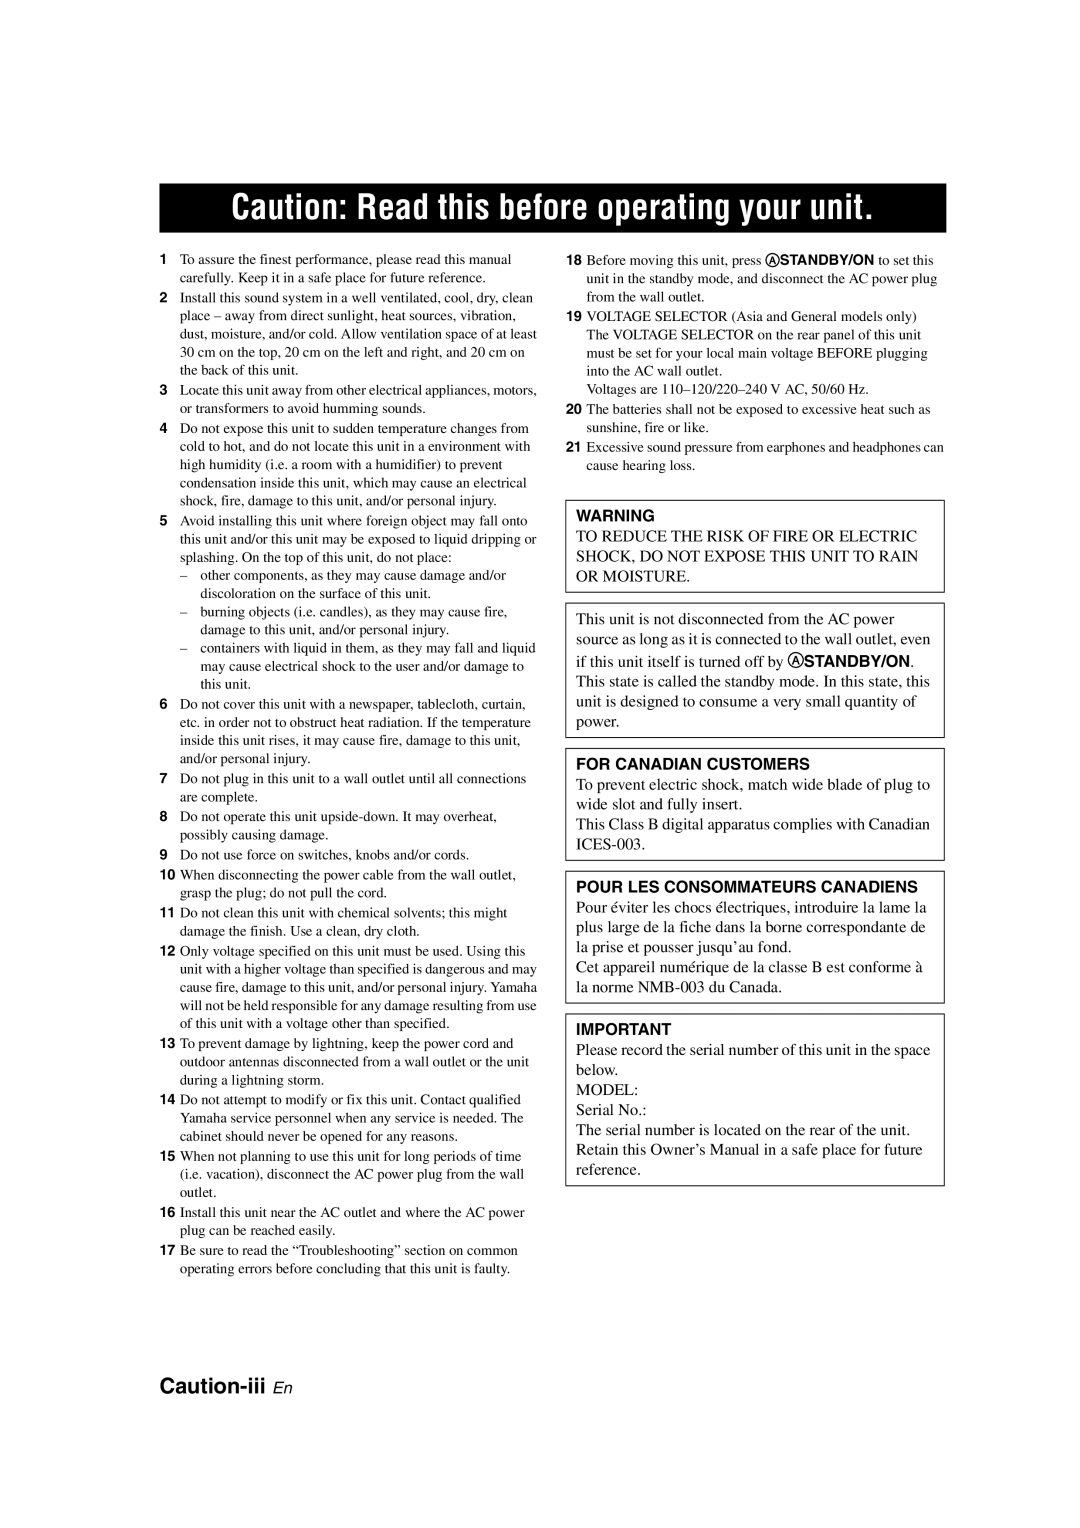 Yamaha HTR-6140 owner manual Caution: Read this before operating your unit, Caution-iii En 